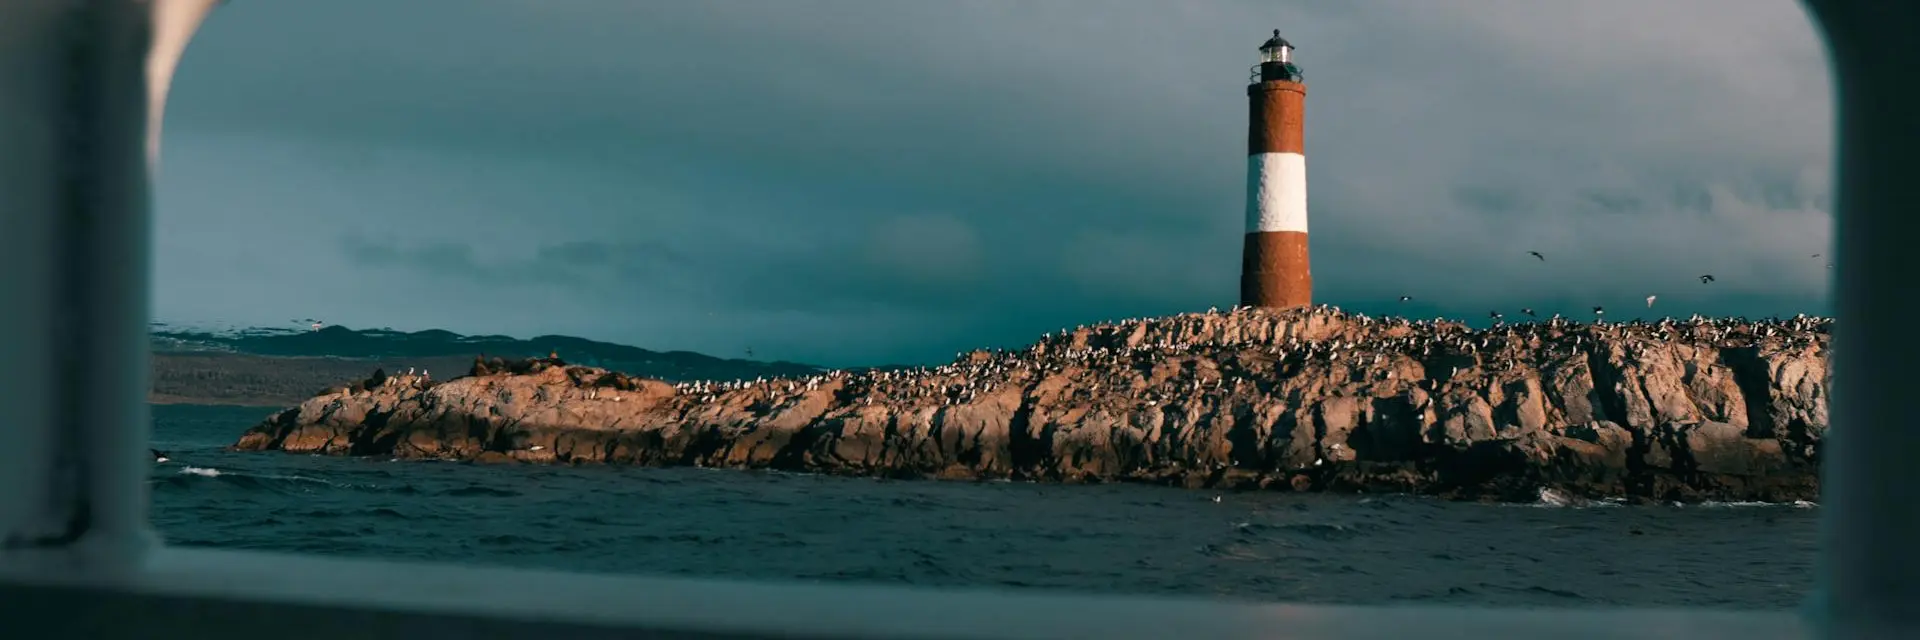 Photo by rois martin: https://www.pexels.com/photo/a-lighthouse-on-a-cape-6263774/